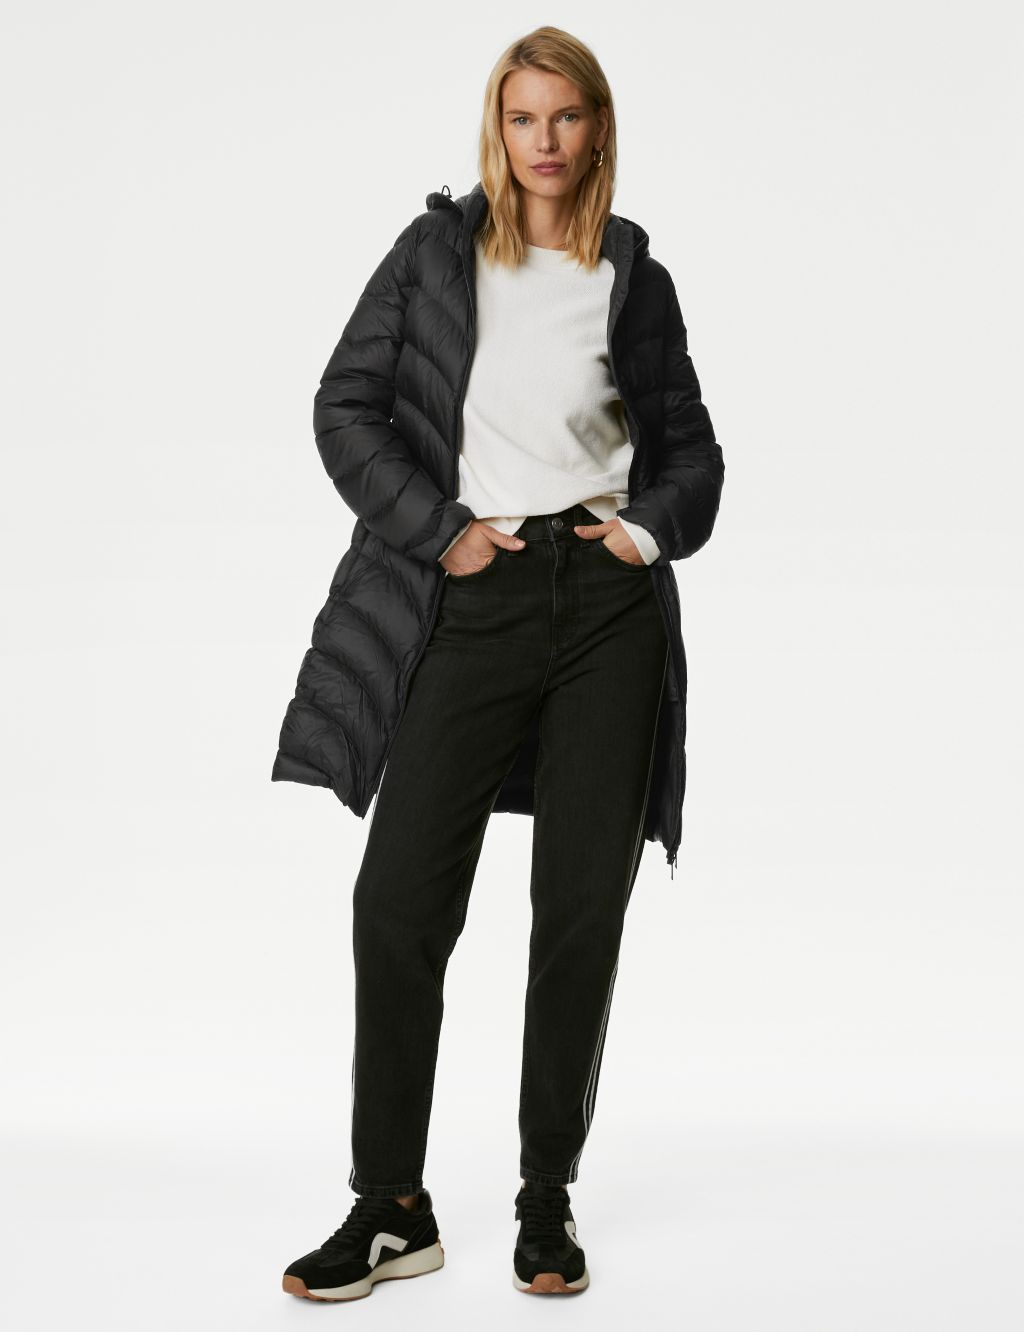 Feather & Down Stormwear™ Puffer Coat | M&S Collection | M&S